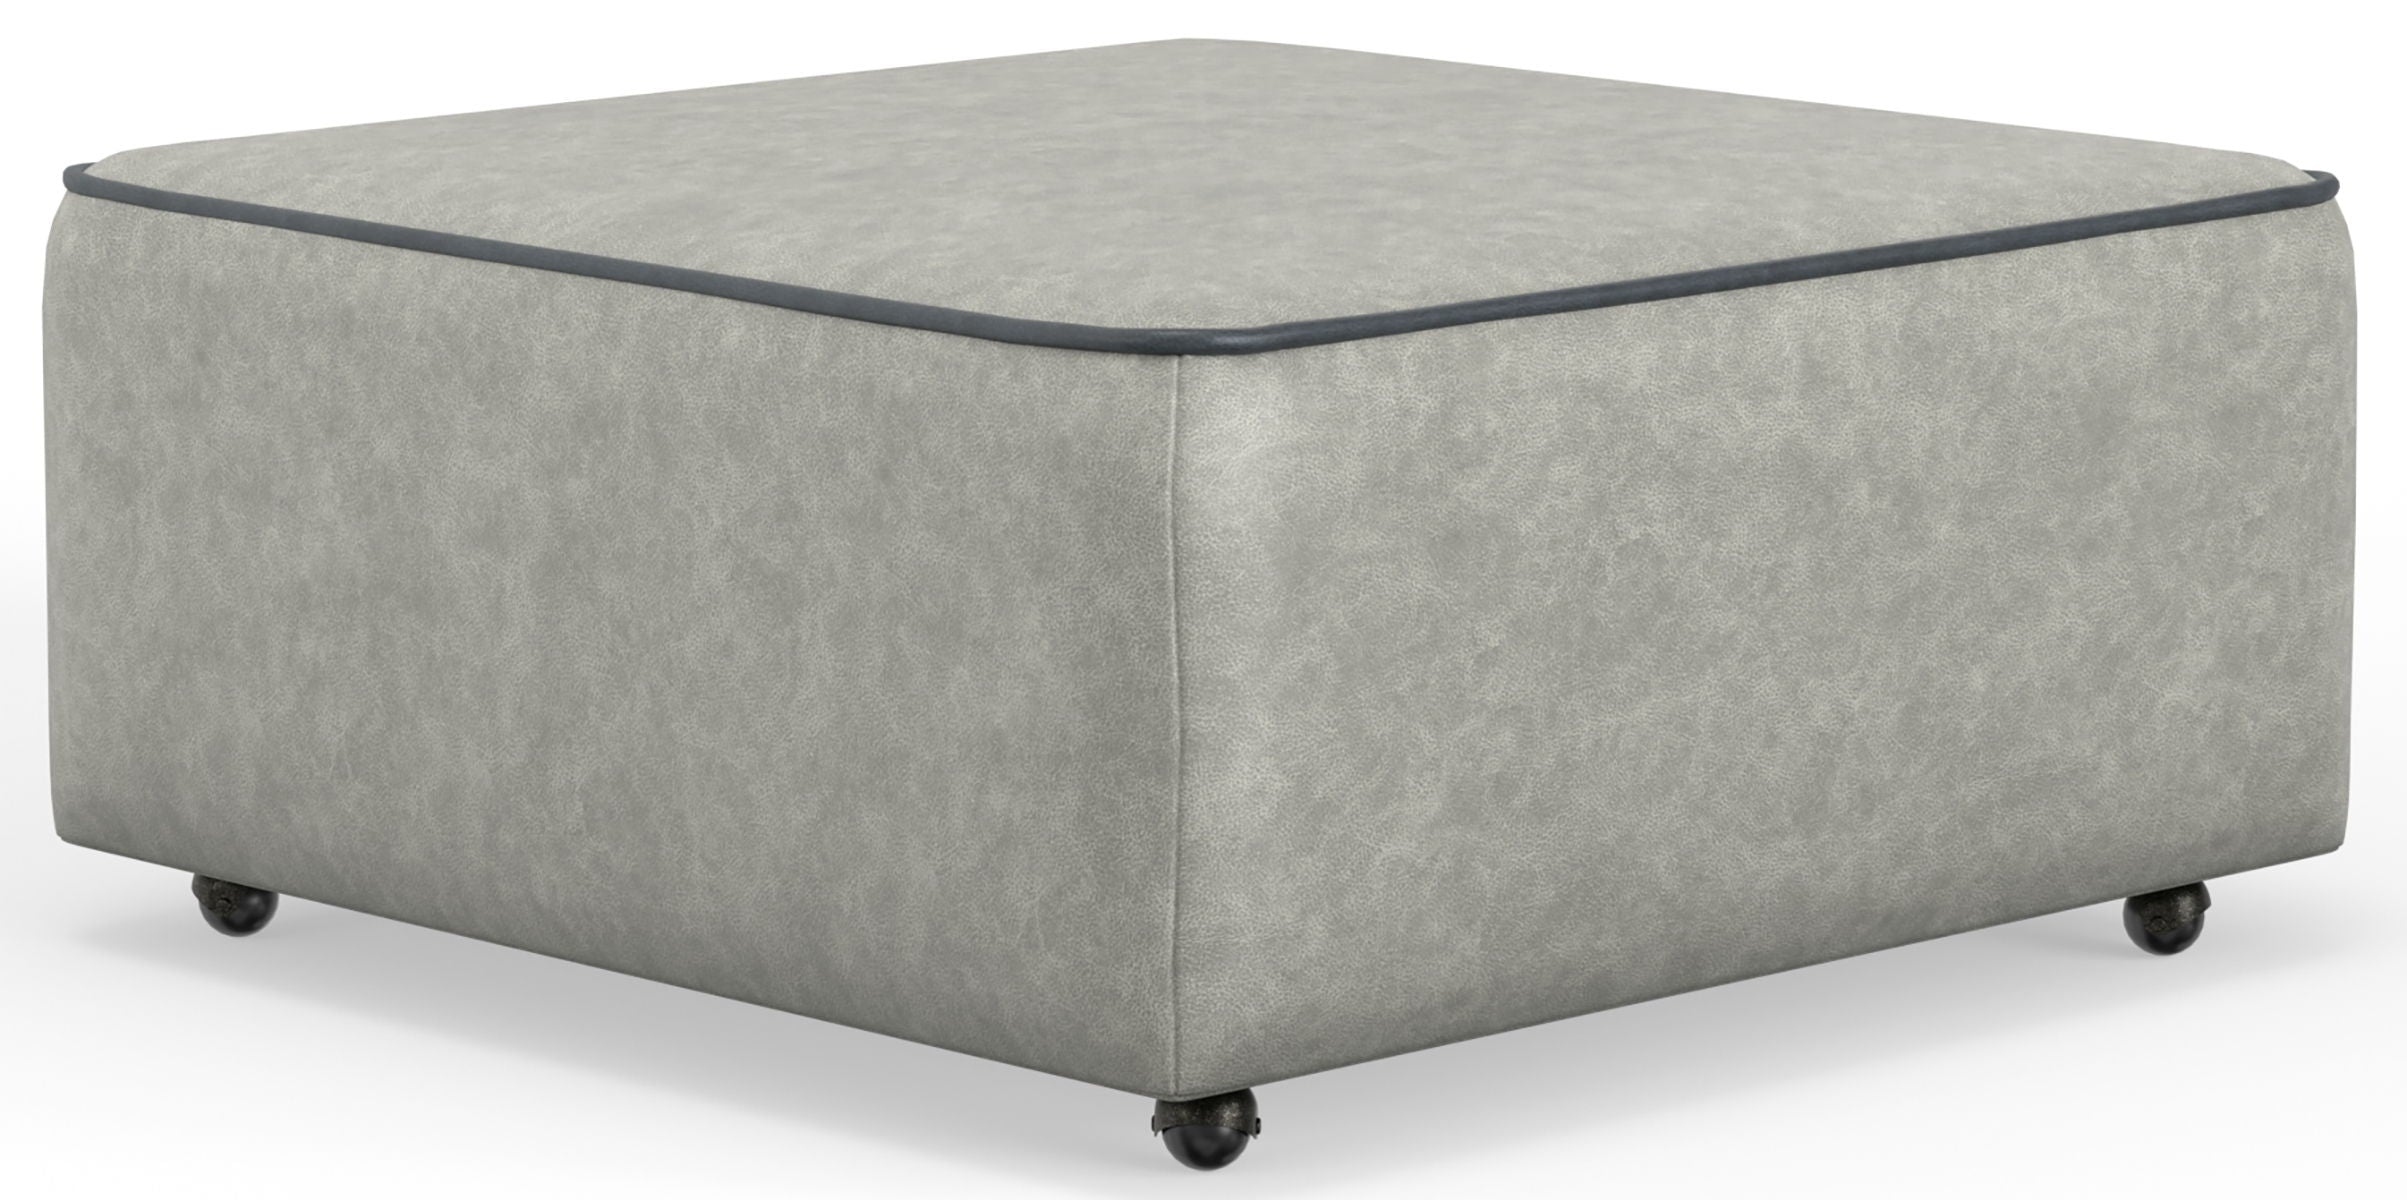 Nico - Castered Cocktail Ottoman